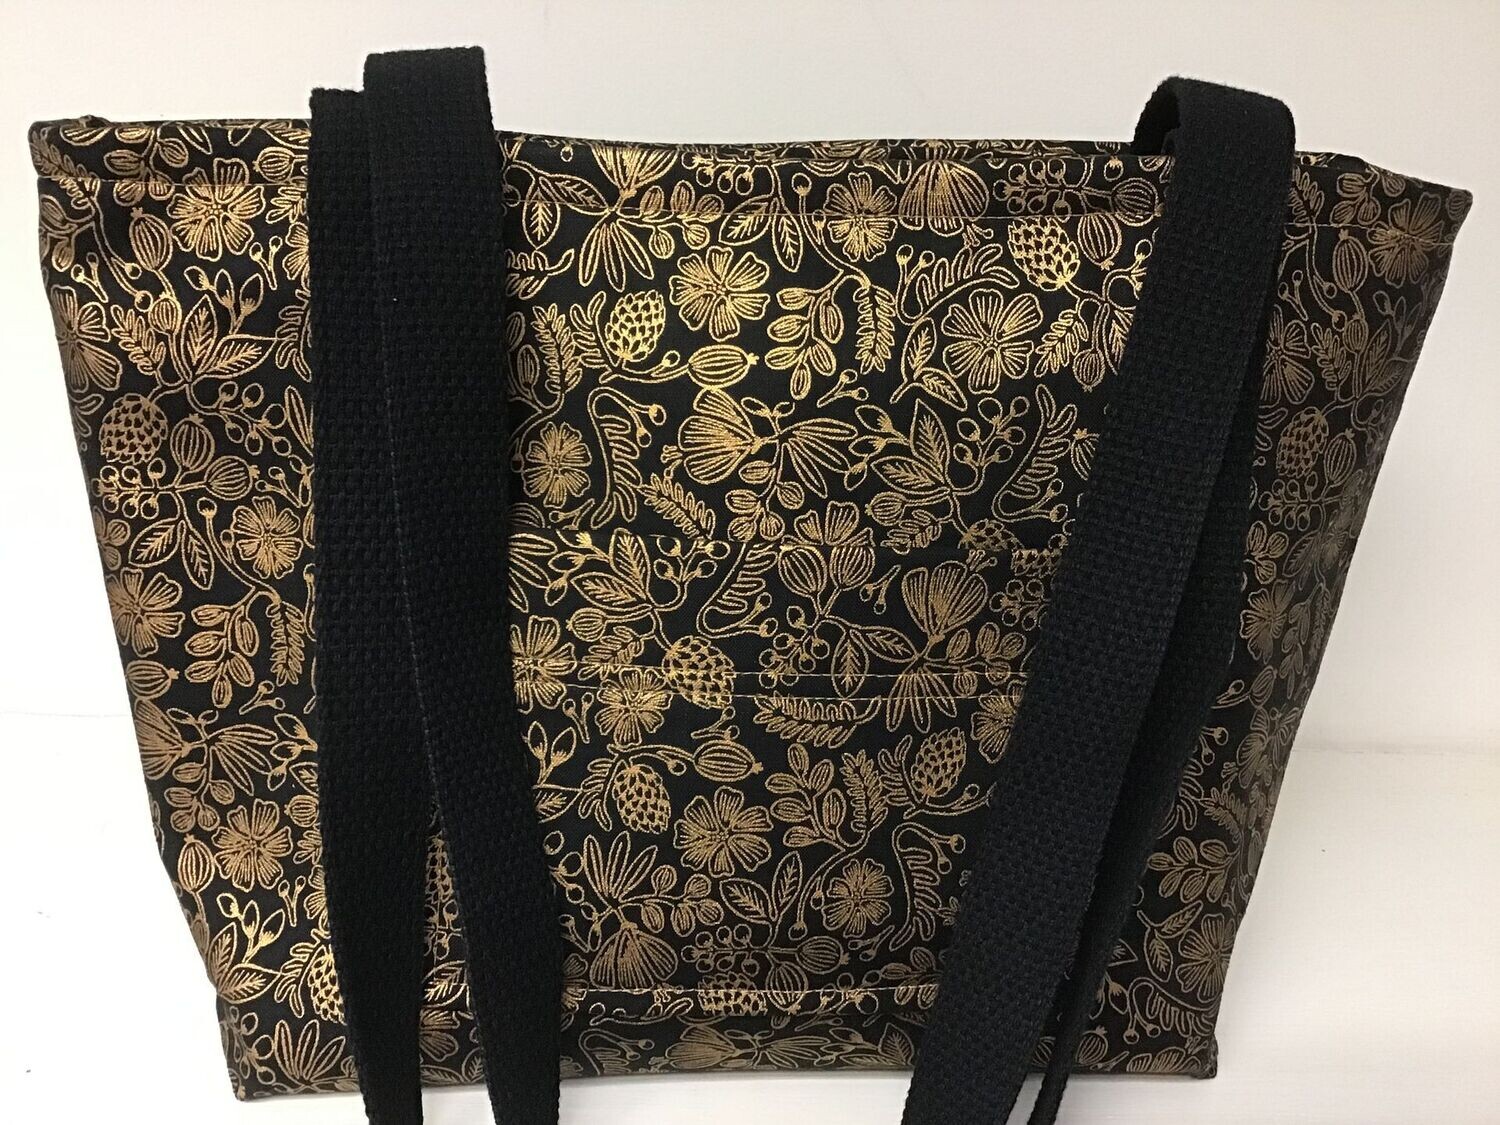 Small floral print in gold on black, black straps